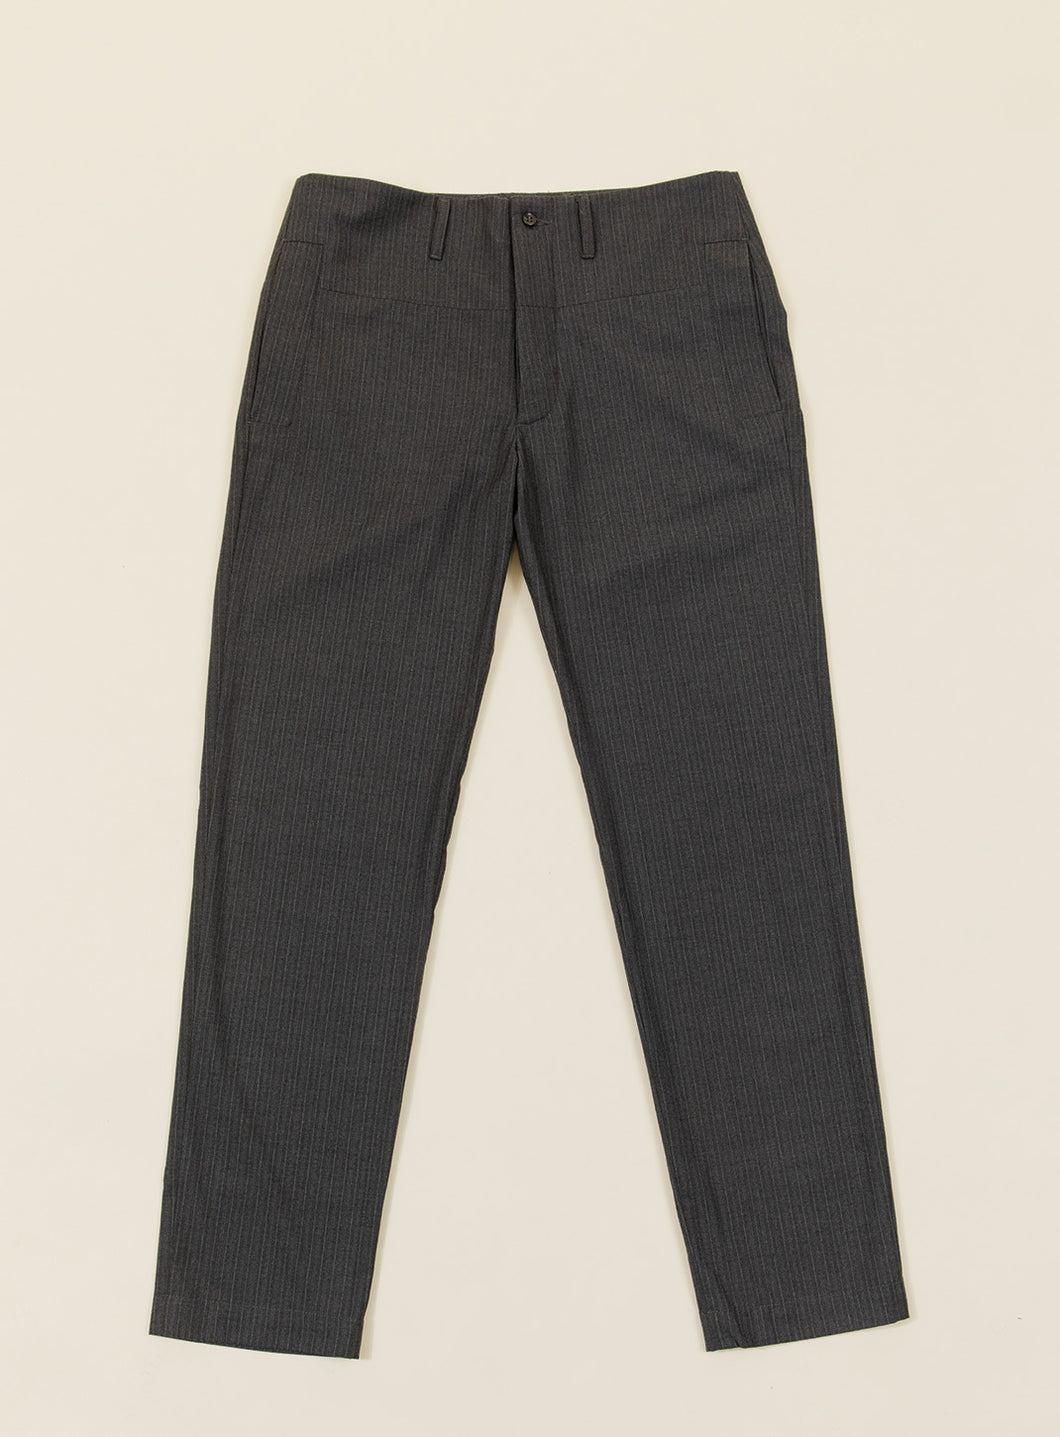 Pants with Large Waist Belt in Graphite Large Stripe Serge Fabric